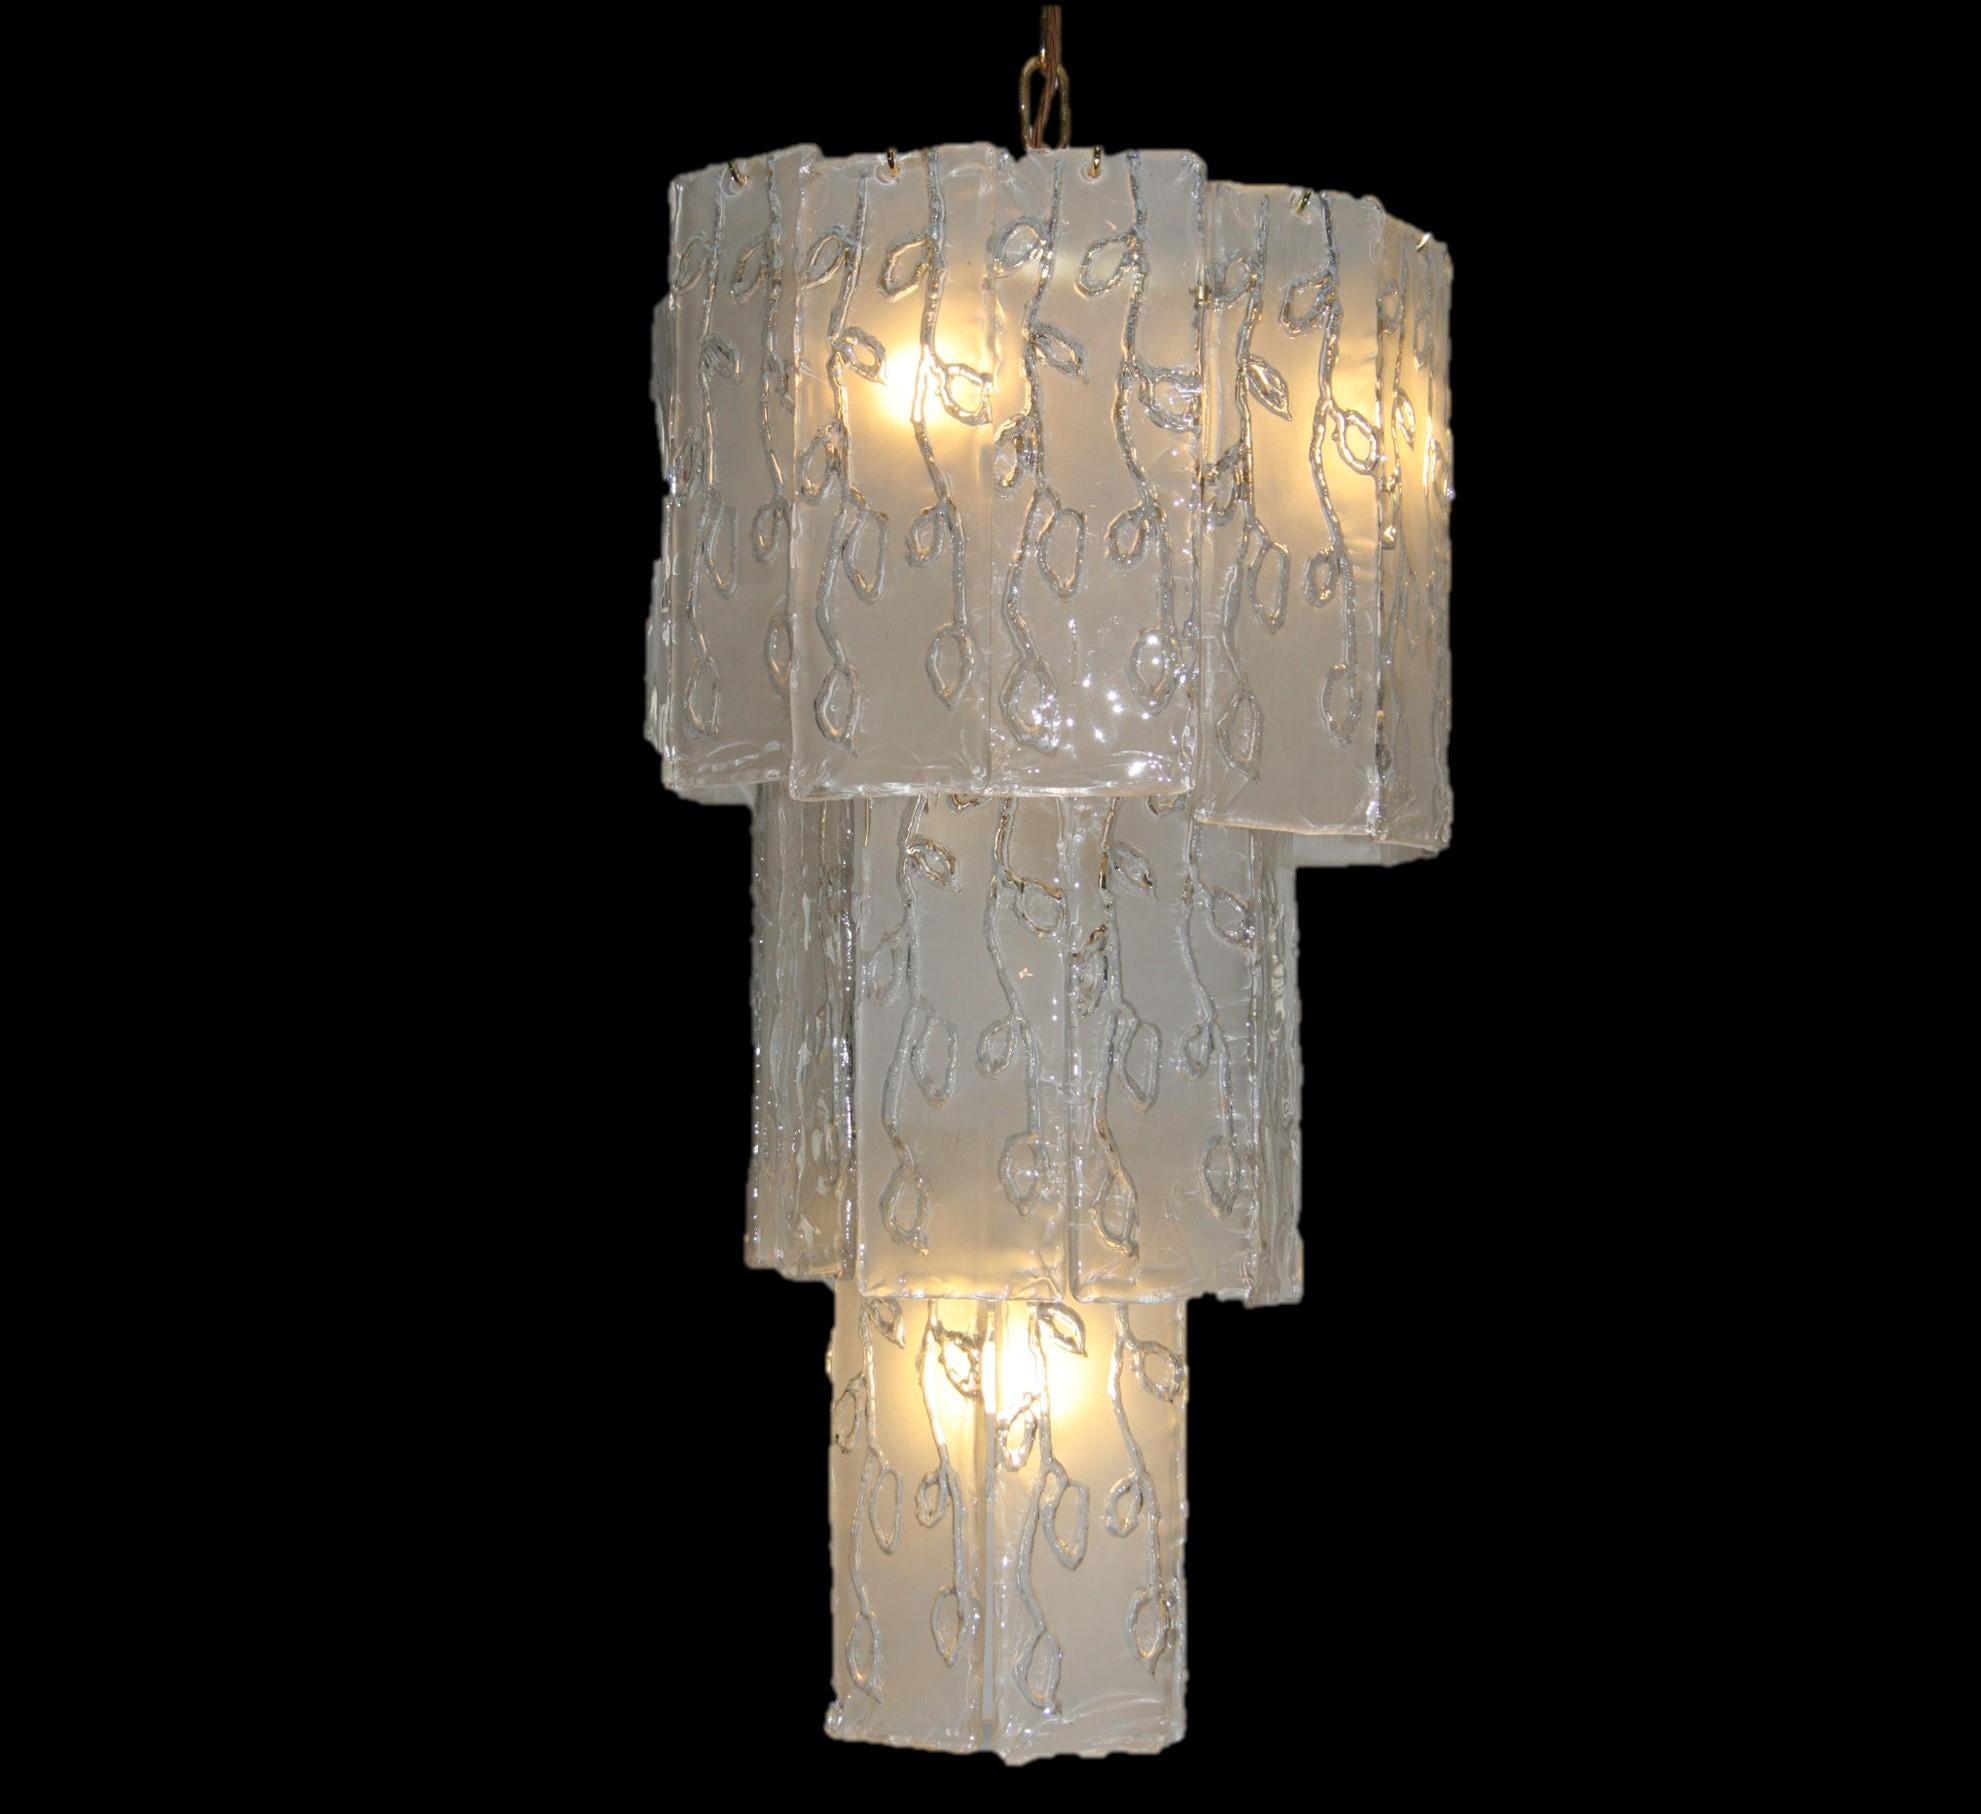 An absolutely stunning and extremely well made vintage chandelier, this dates from the 1960s. It has a brass frame and many frosted glass panels that hang from the frame in three tiers. The condition is superb for its age, this is wired and in good